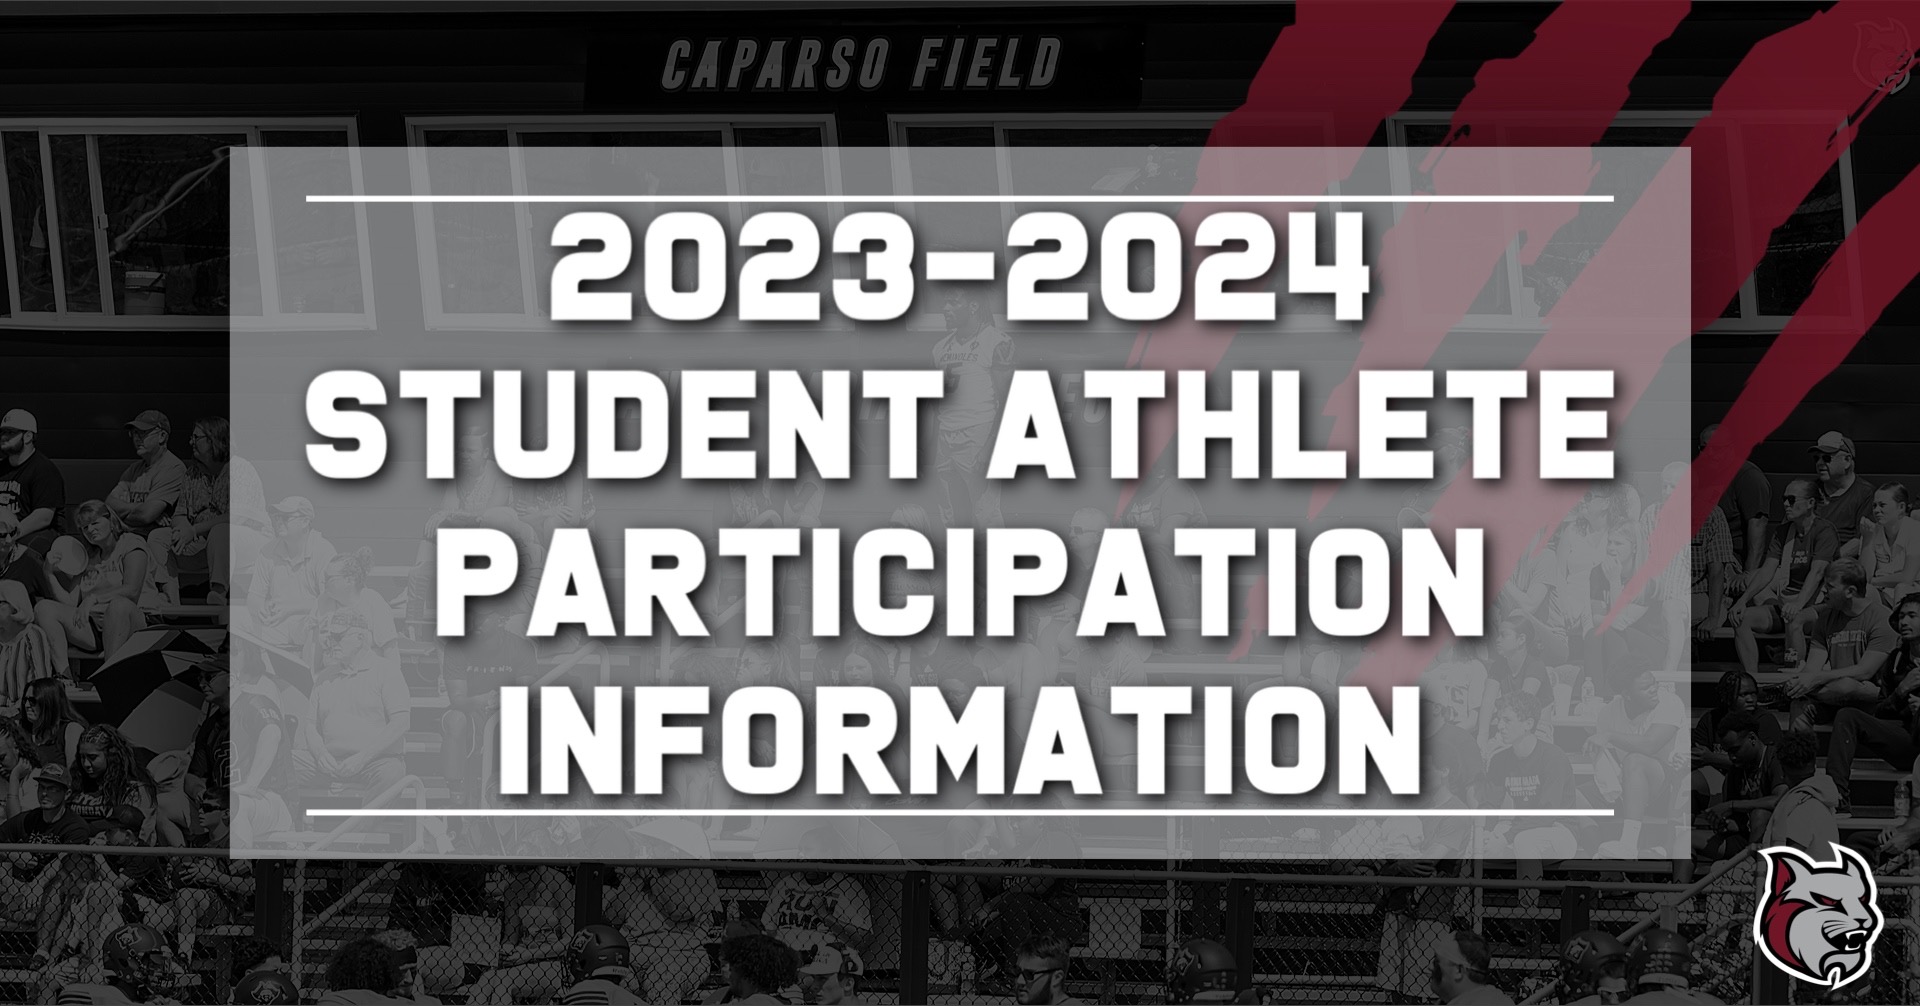 2023-2024 STUDENT ATHLETE PARTICIPATION AND FALL EARLY ARRIVAL INFORMATION